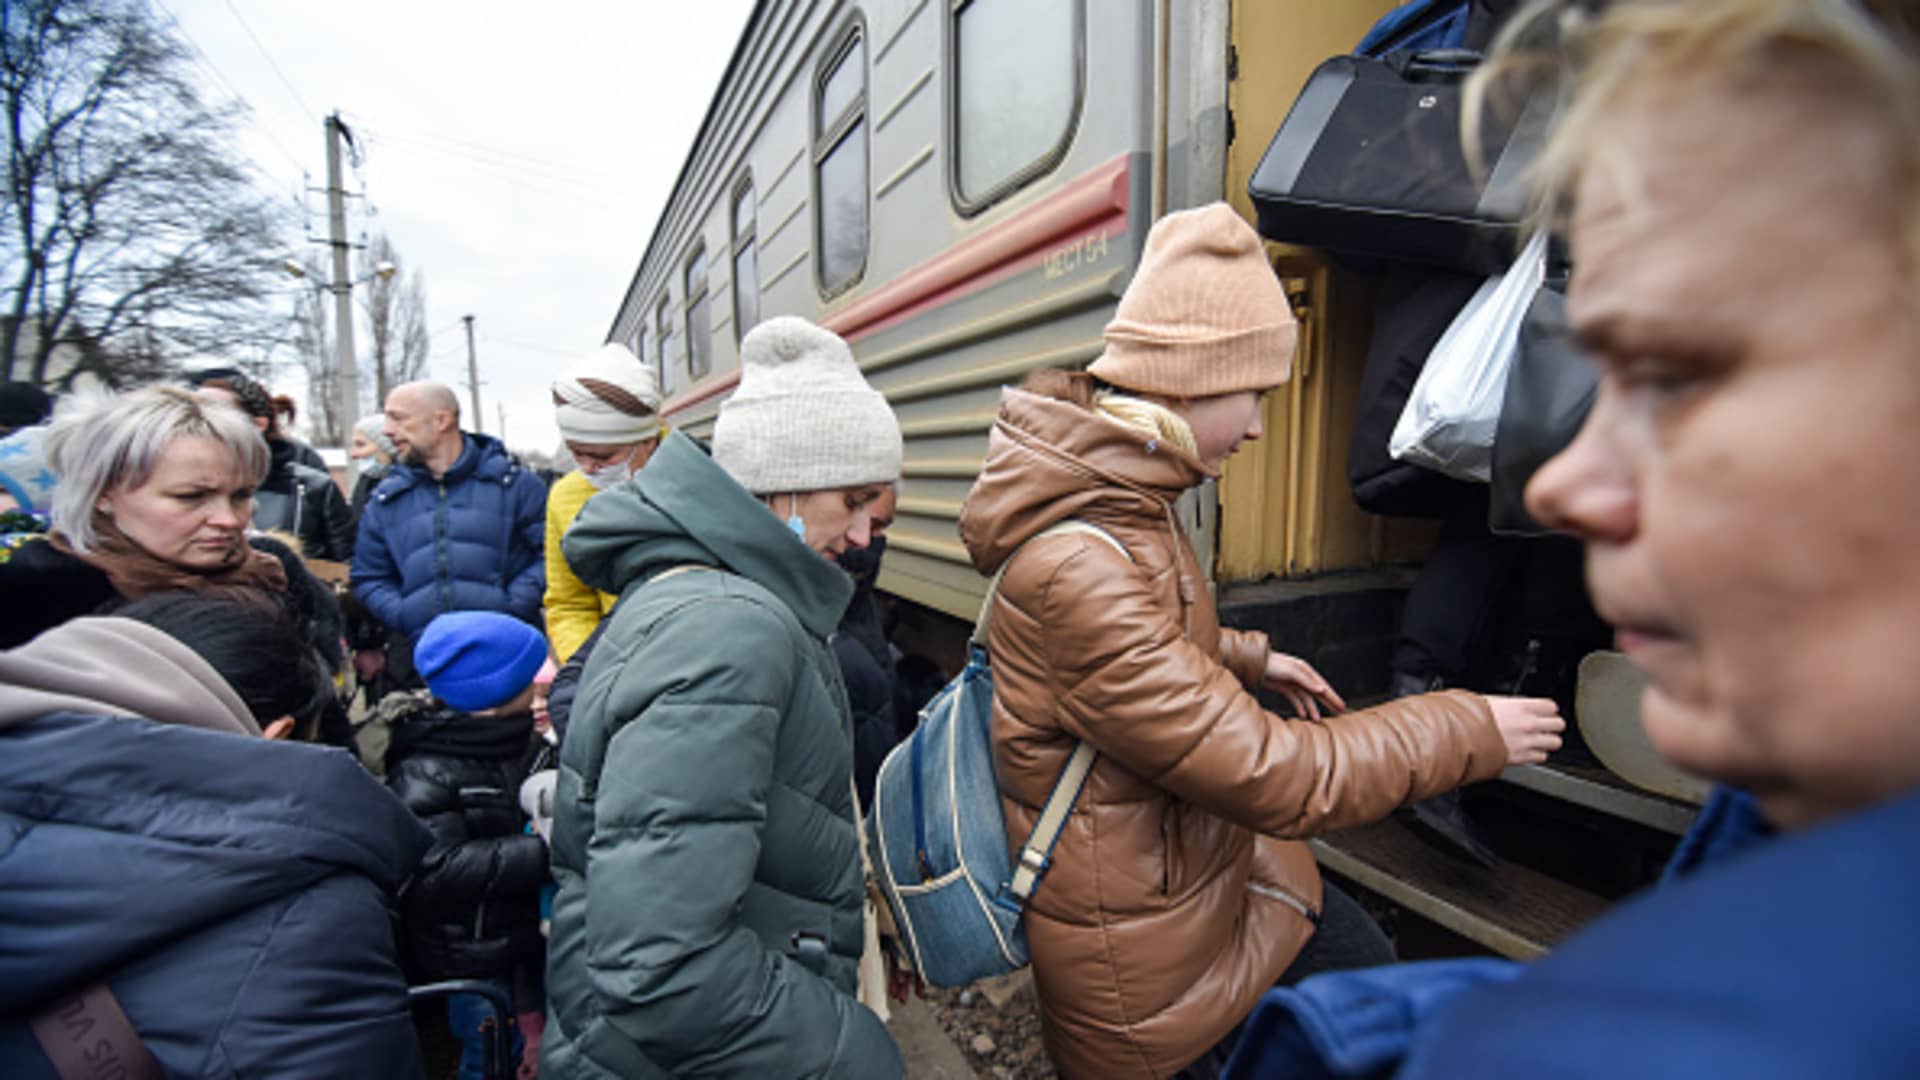 Residents of the Donetsk Peoples Republic board a train at the Donetsk-2 railway station as they evacuate to Russias Rostov-on-Don Region. Amid the escalating conflict in east Ukraine, on February 18, 2022, the heads of the Lugansk and Donetsk People's Republics announced a mass evacuation of civilians to Russia.